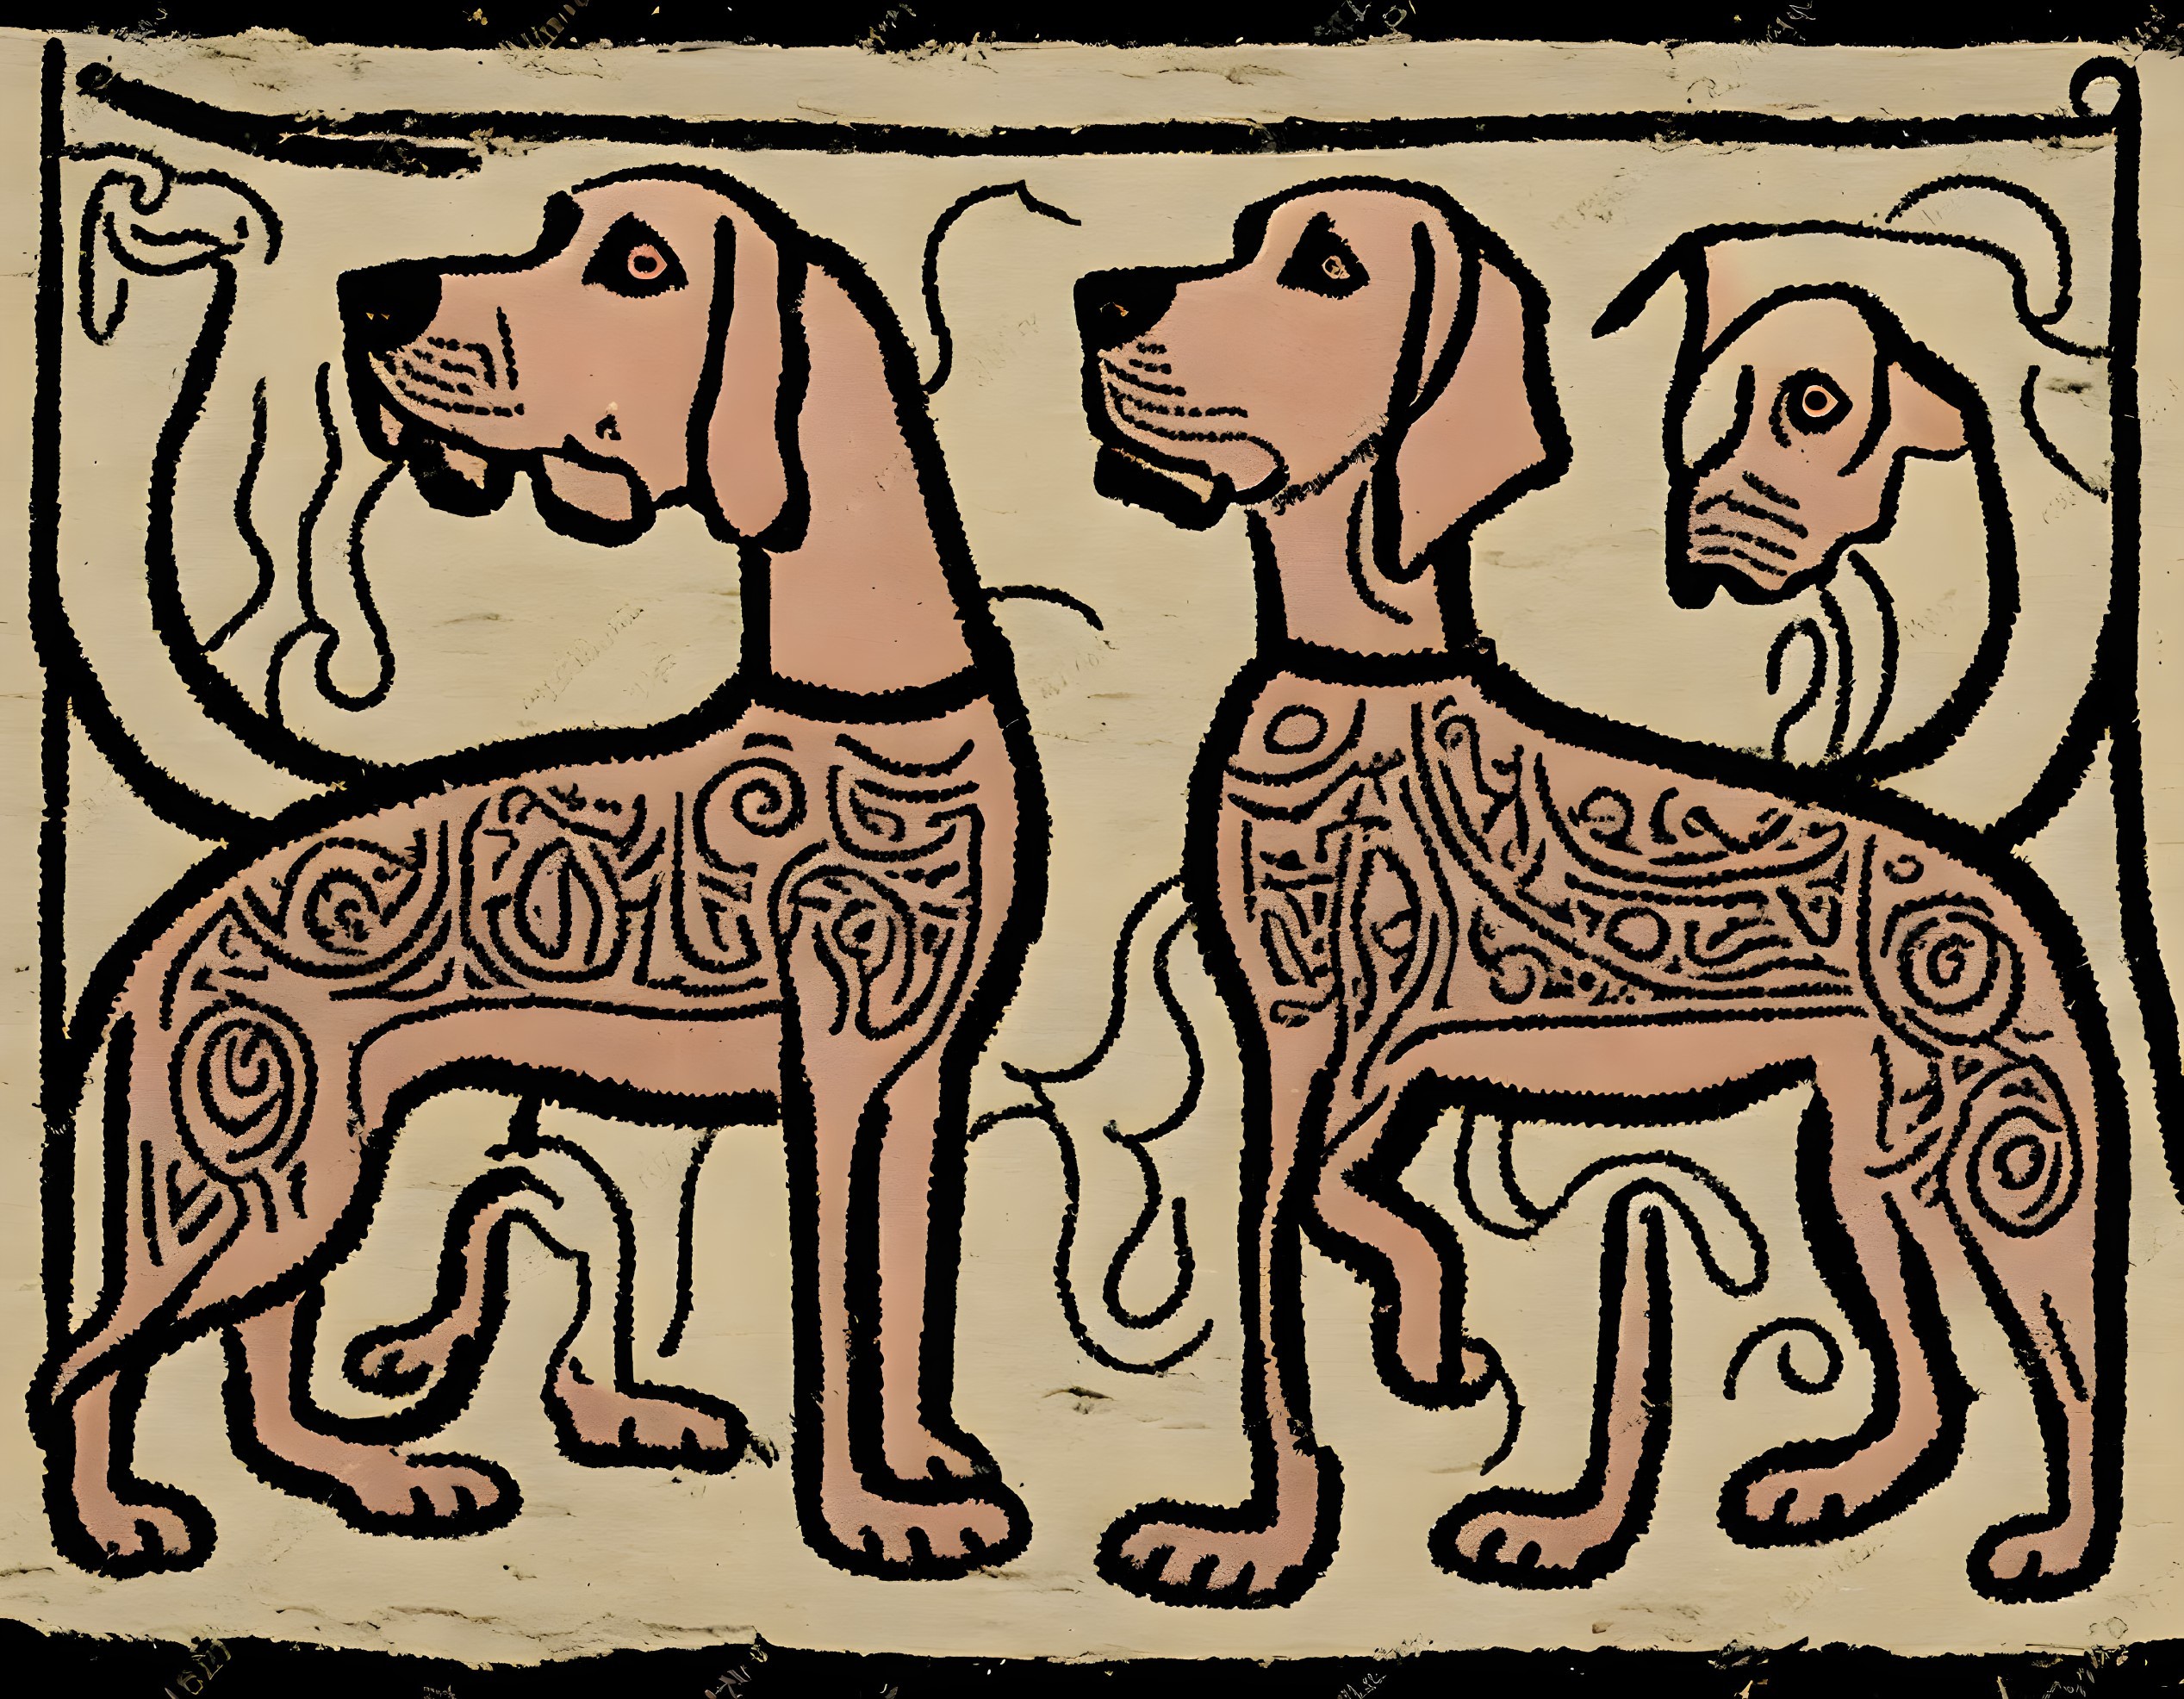 Three stylized profile dogs with intricate patterns on textured background